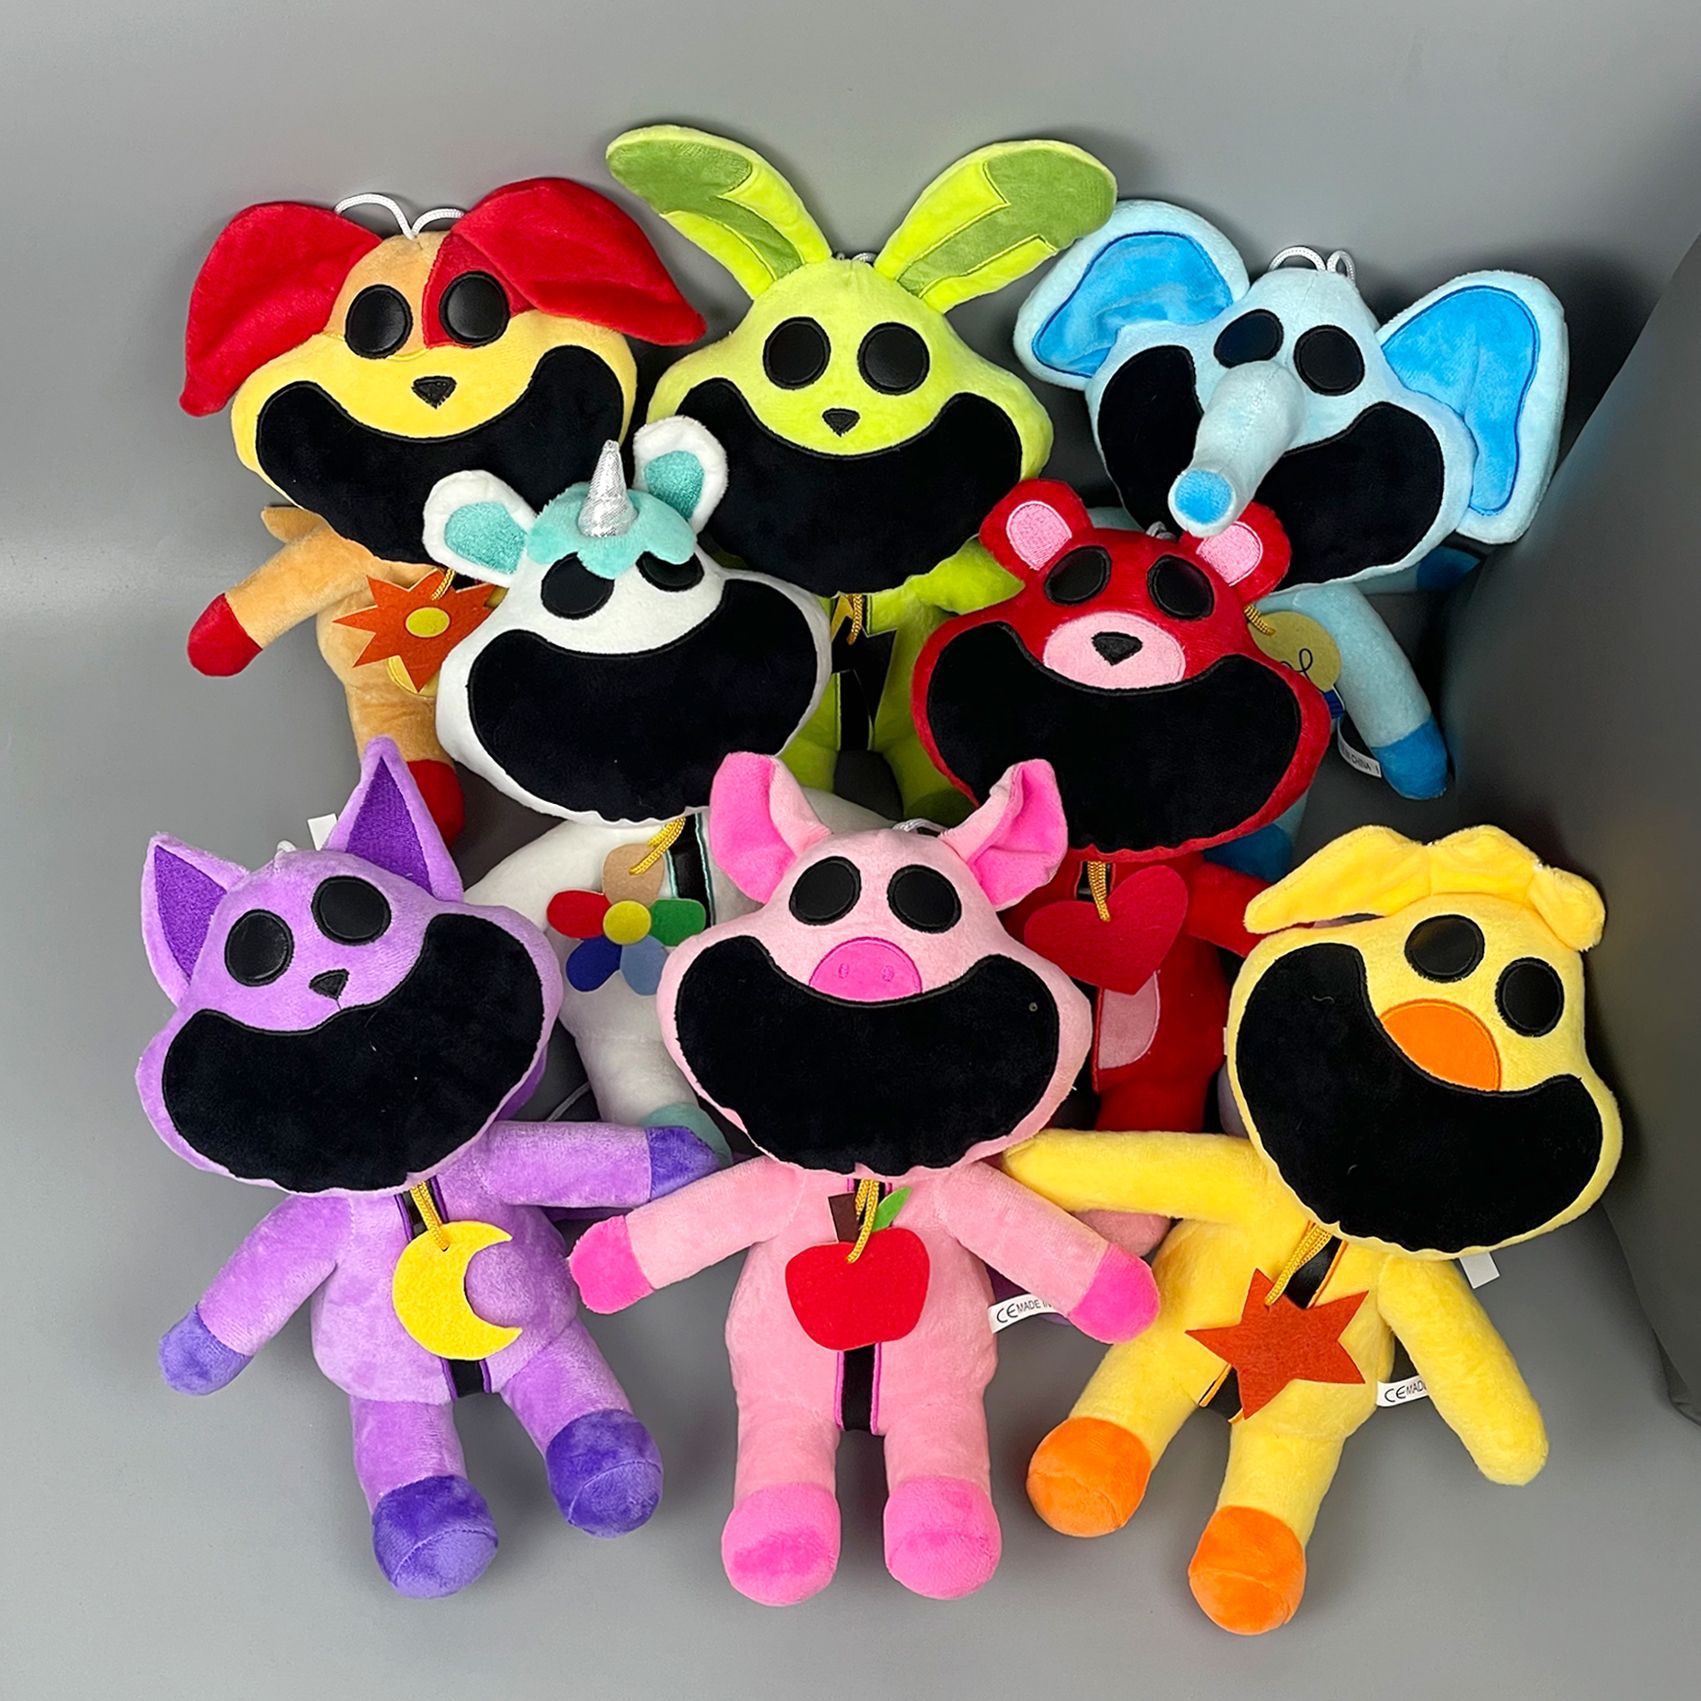 Poppy's Game 3 smiling critters doll plush toy